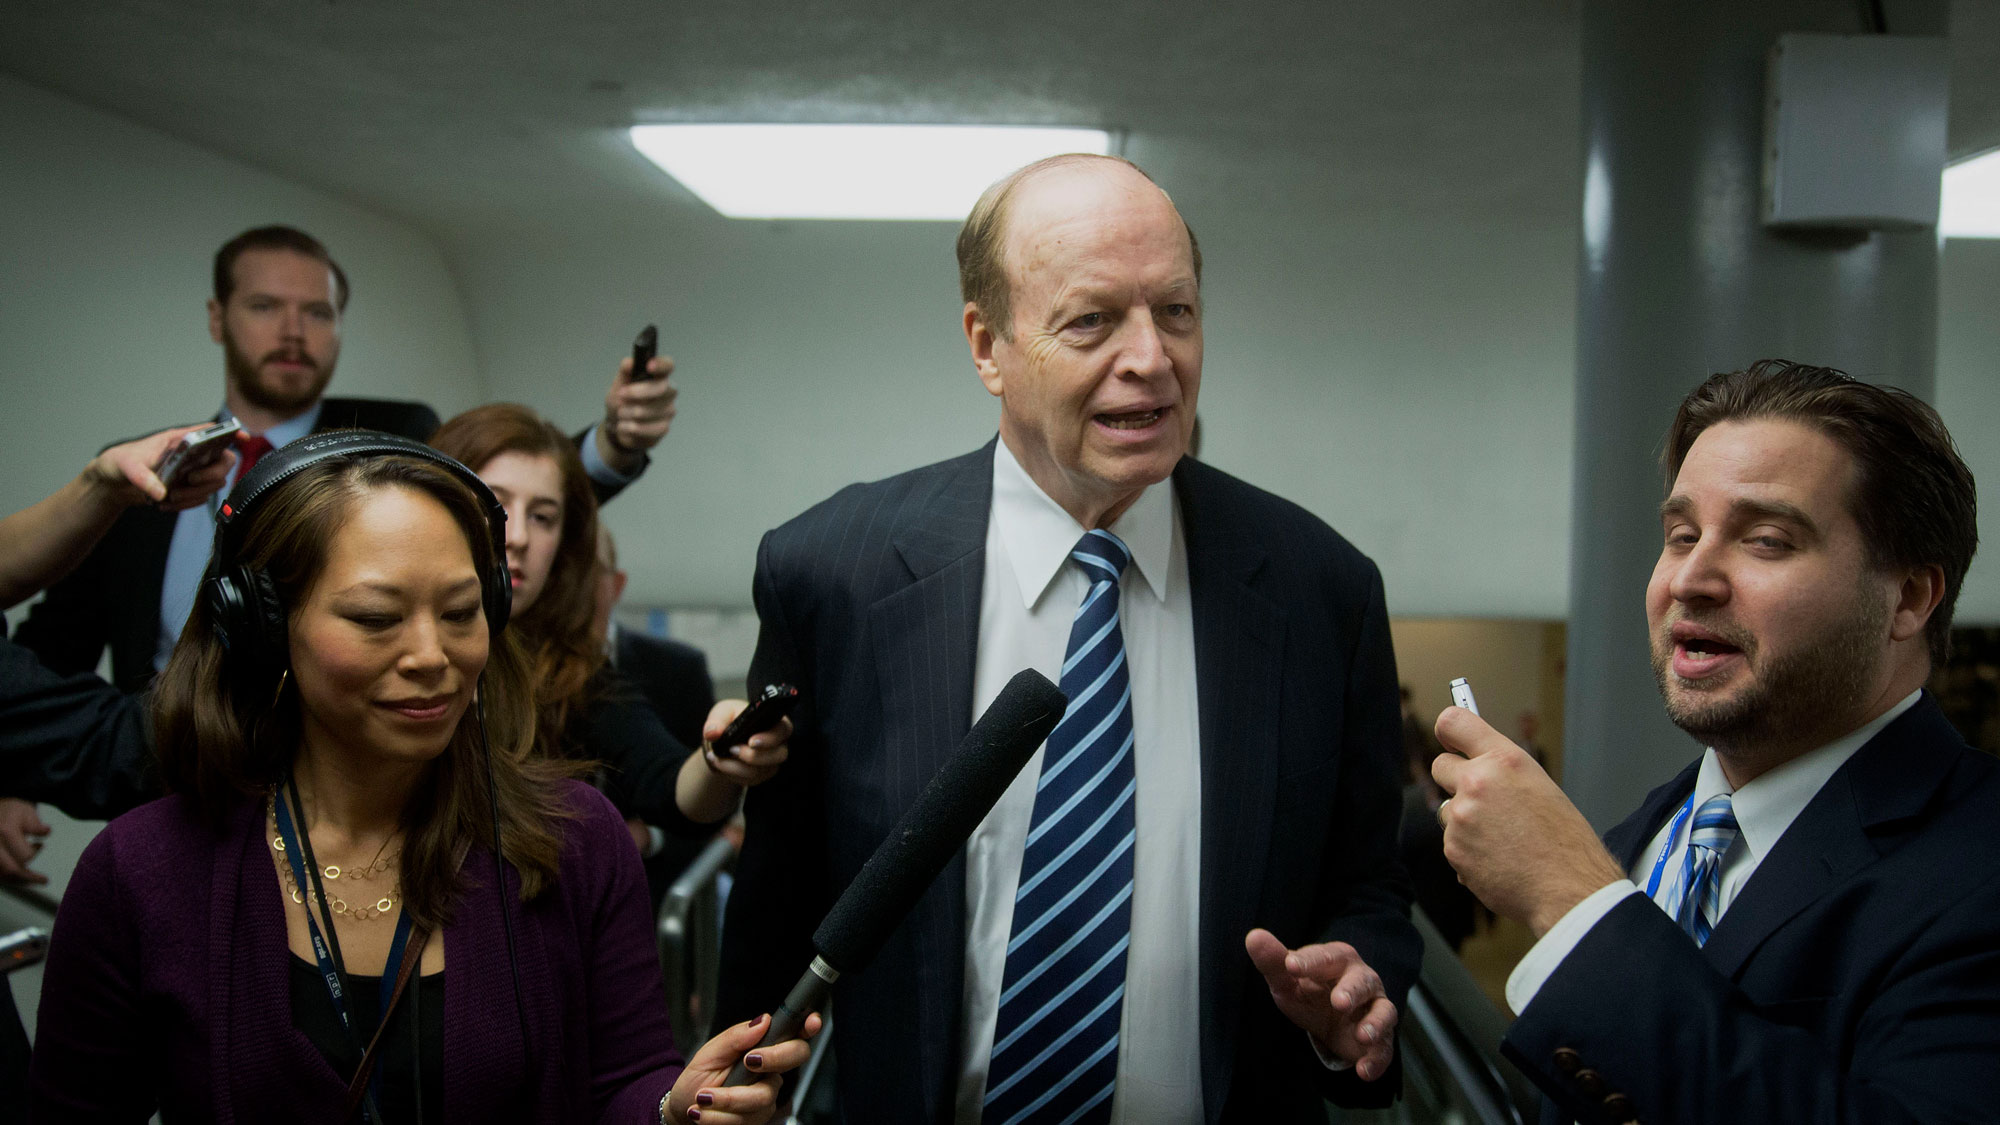 Senator Richard Shelby, a Republican from Alabama, speaks to reporters in the U.S. Capitol Building basement before voting in Washington, D.C., U.S., on Tuesday, Dec. 9, 2014.
